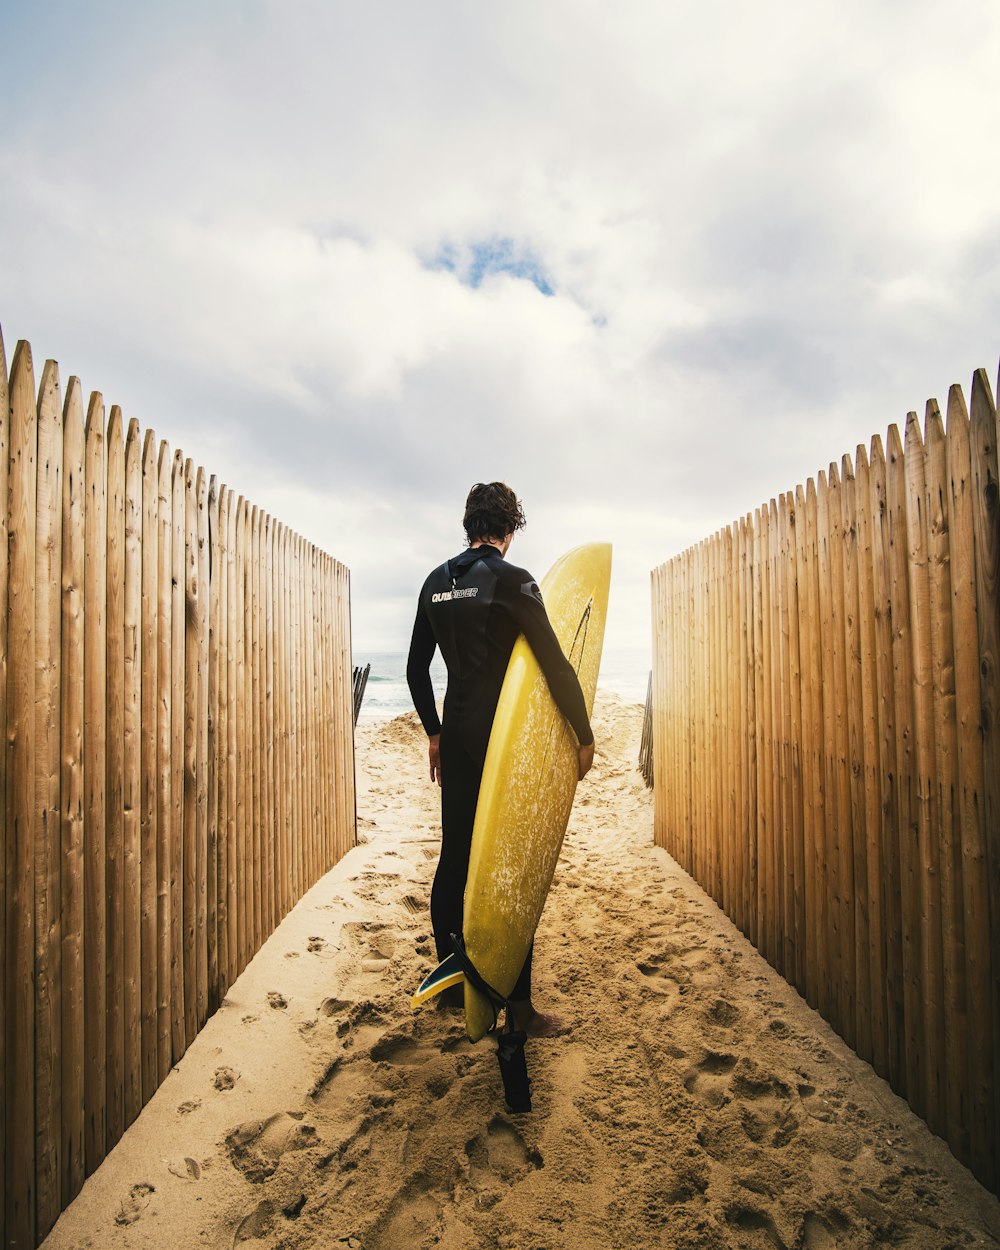 person standing between privacy fences while holding yellow surfboard during daytime